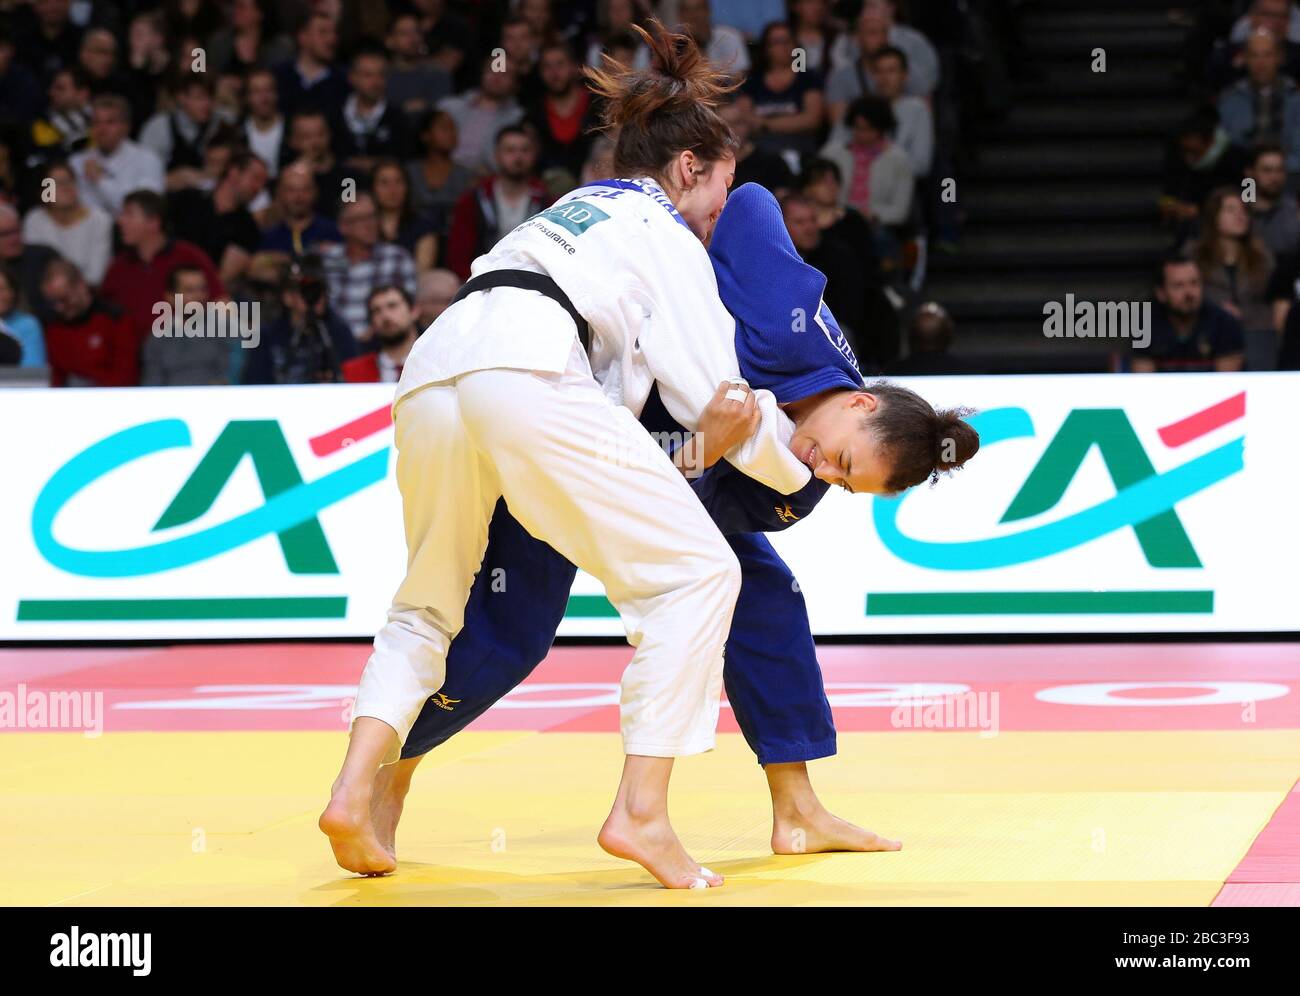 Paris, France - 09th Feb, 2020: Gabriella Willems for Belgium against Chantal Wright for the USA, Women's -70 kg, Round Two (Credit: Mickael Chavet) Stock Photo